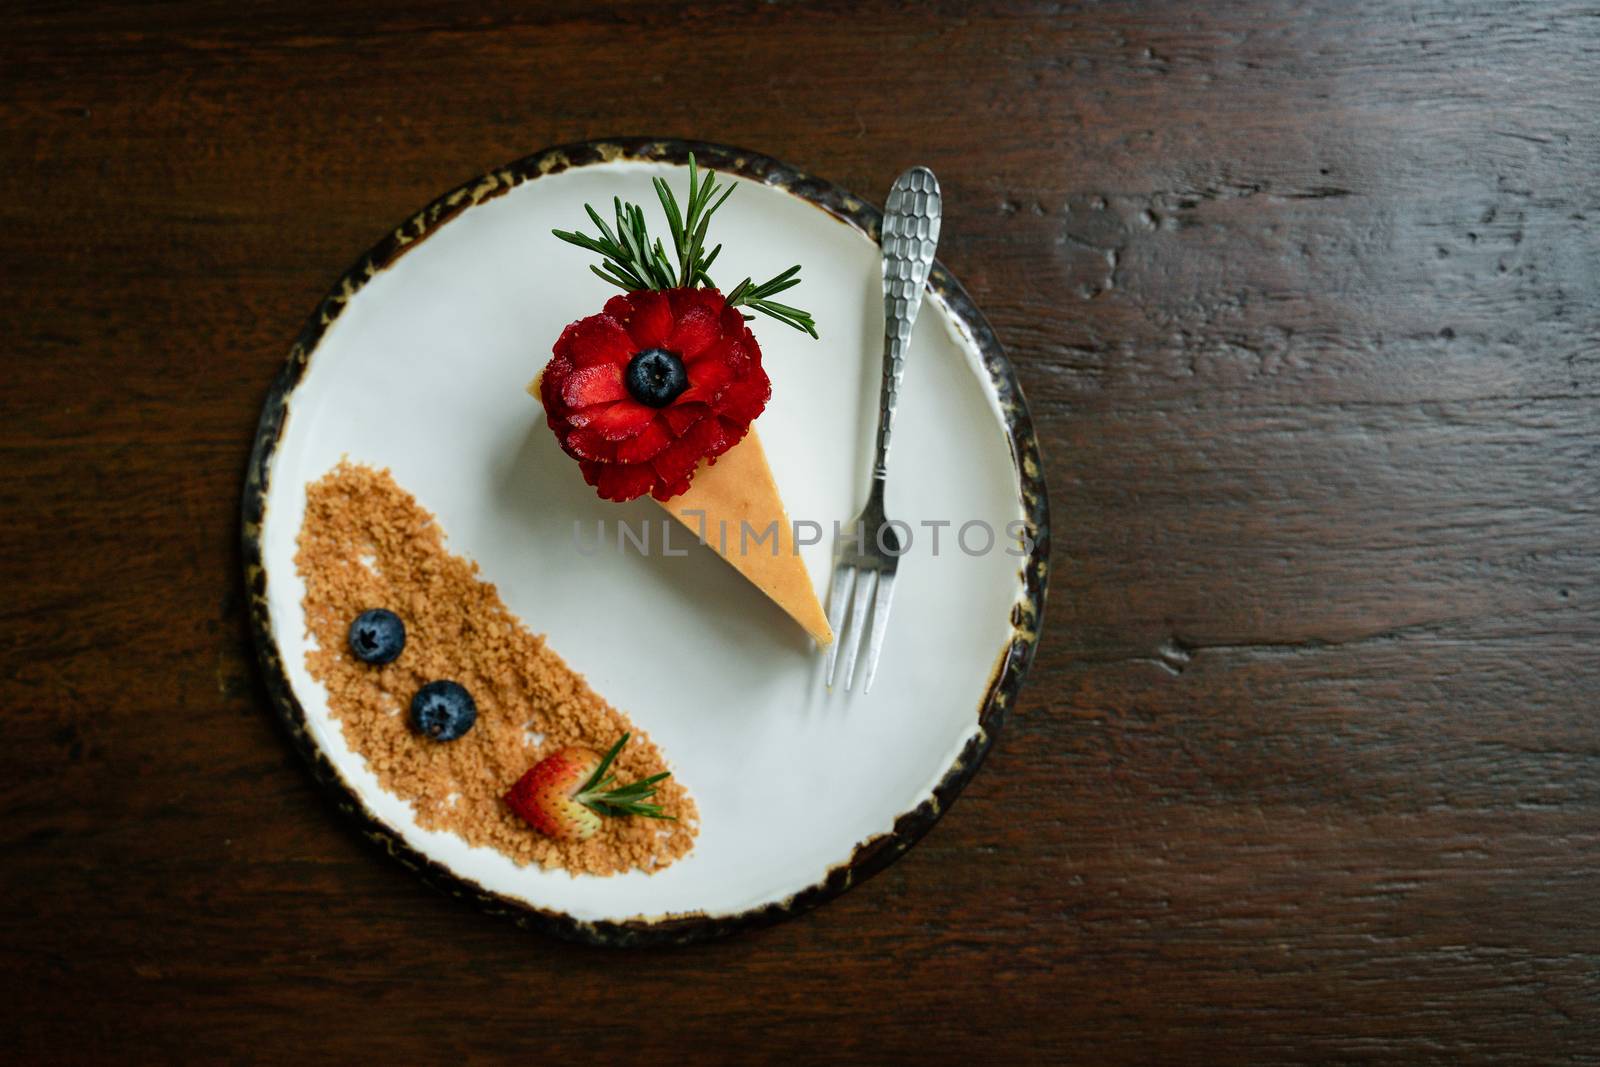 Top view photos of beautifully decorated cakes on white tiled pl by ToonPhotoClub